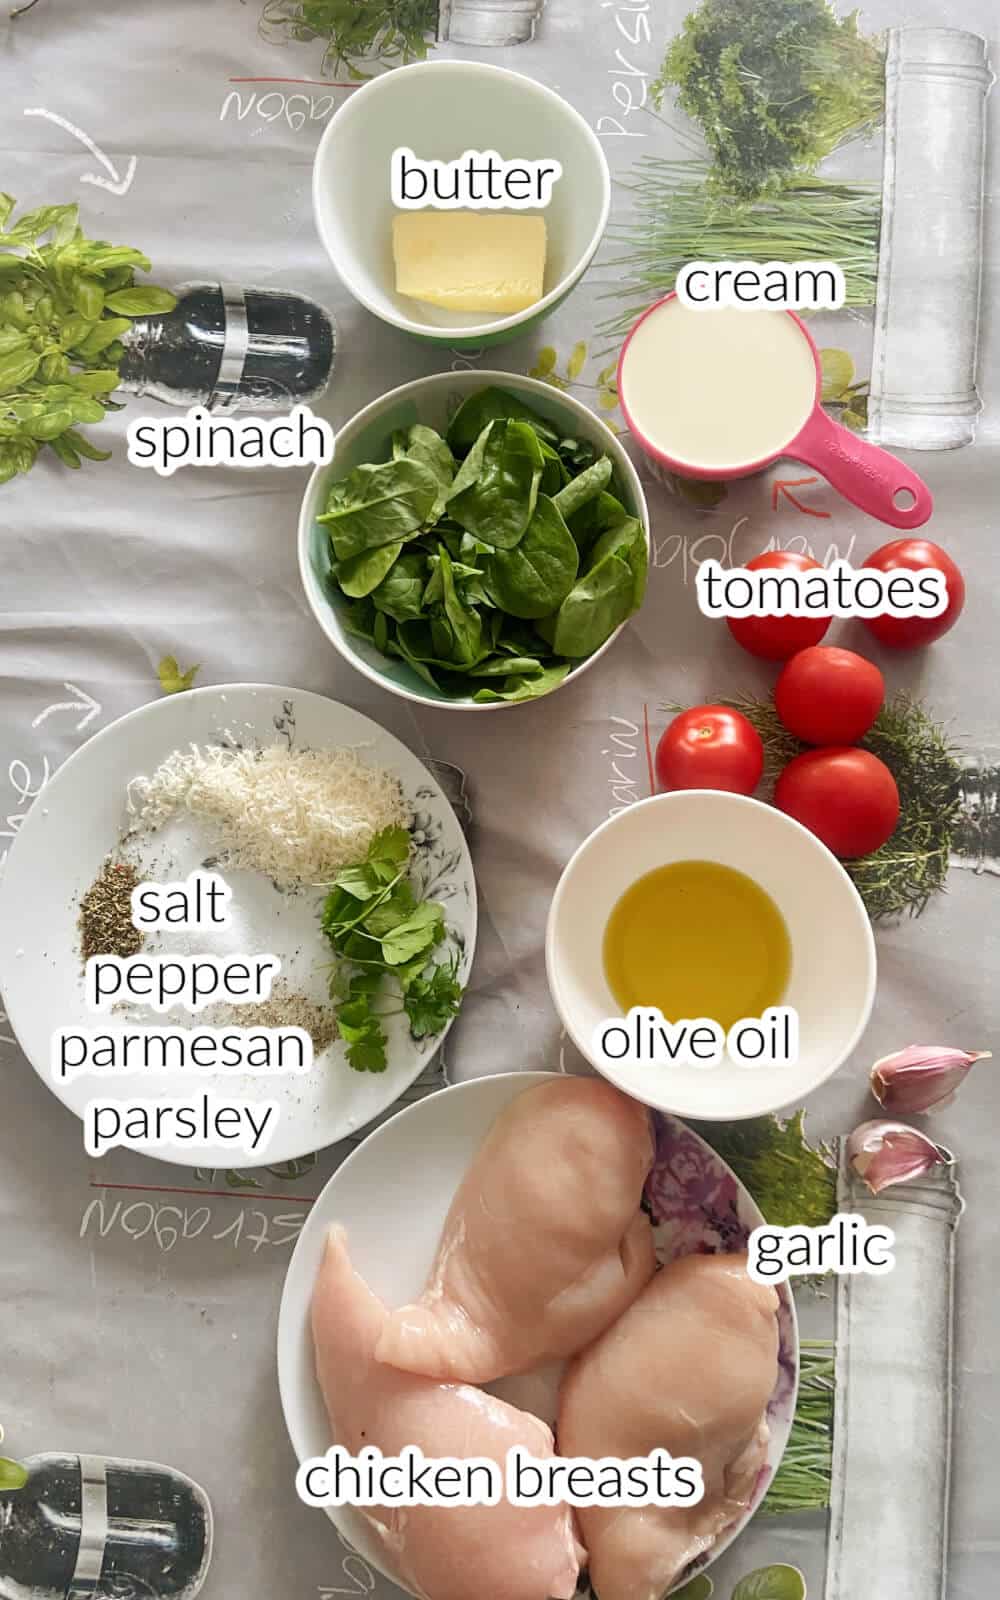 Ingredients used to make Tuscan chicken.